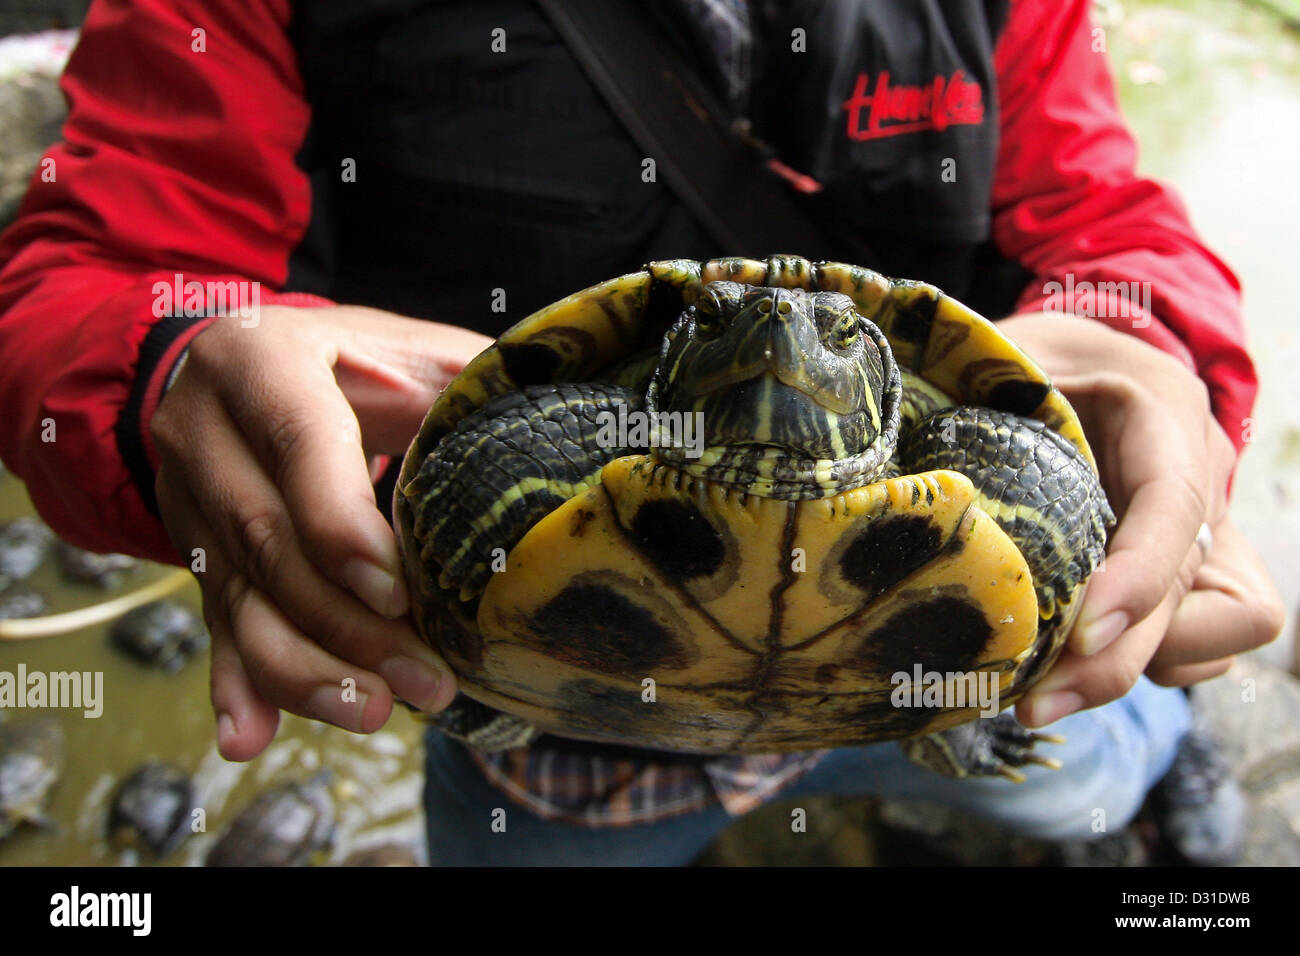 Feb. 6, 2013 - Batam, Kepulauan Riau, Indonesia - Green turtles or turtle  Brazil has the Latin name trachemys scripta elegans. Physical  .characteristics of this type of turtle is has a red